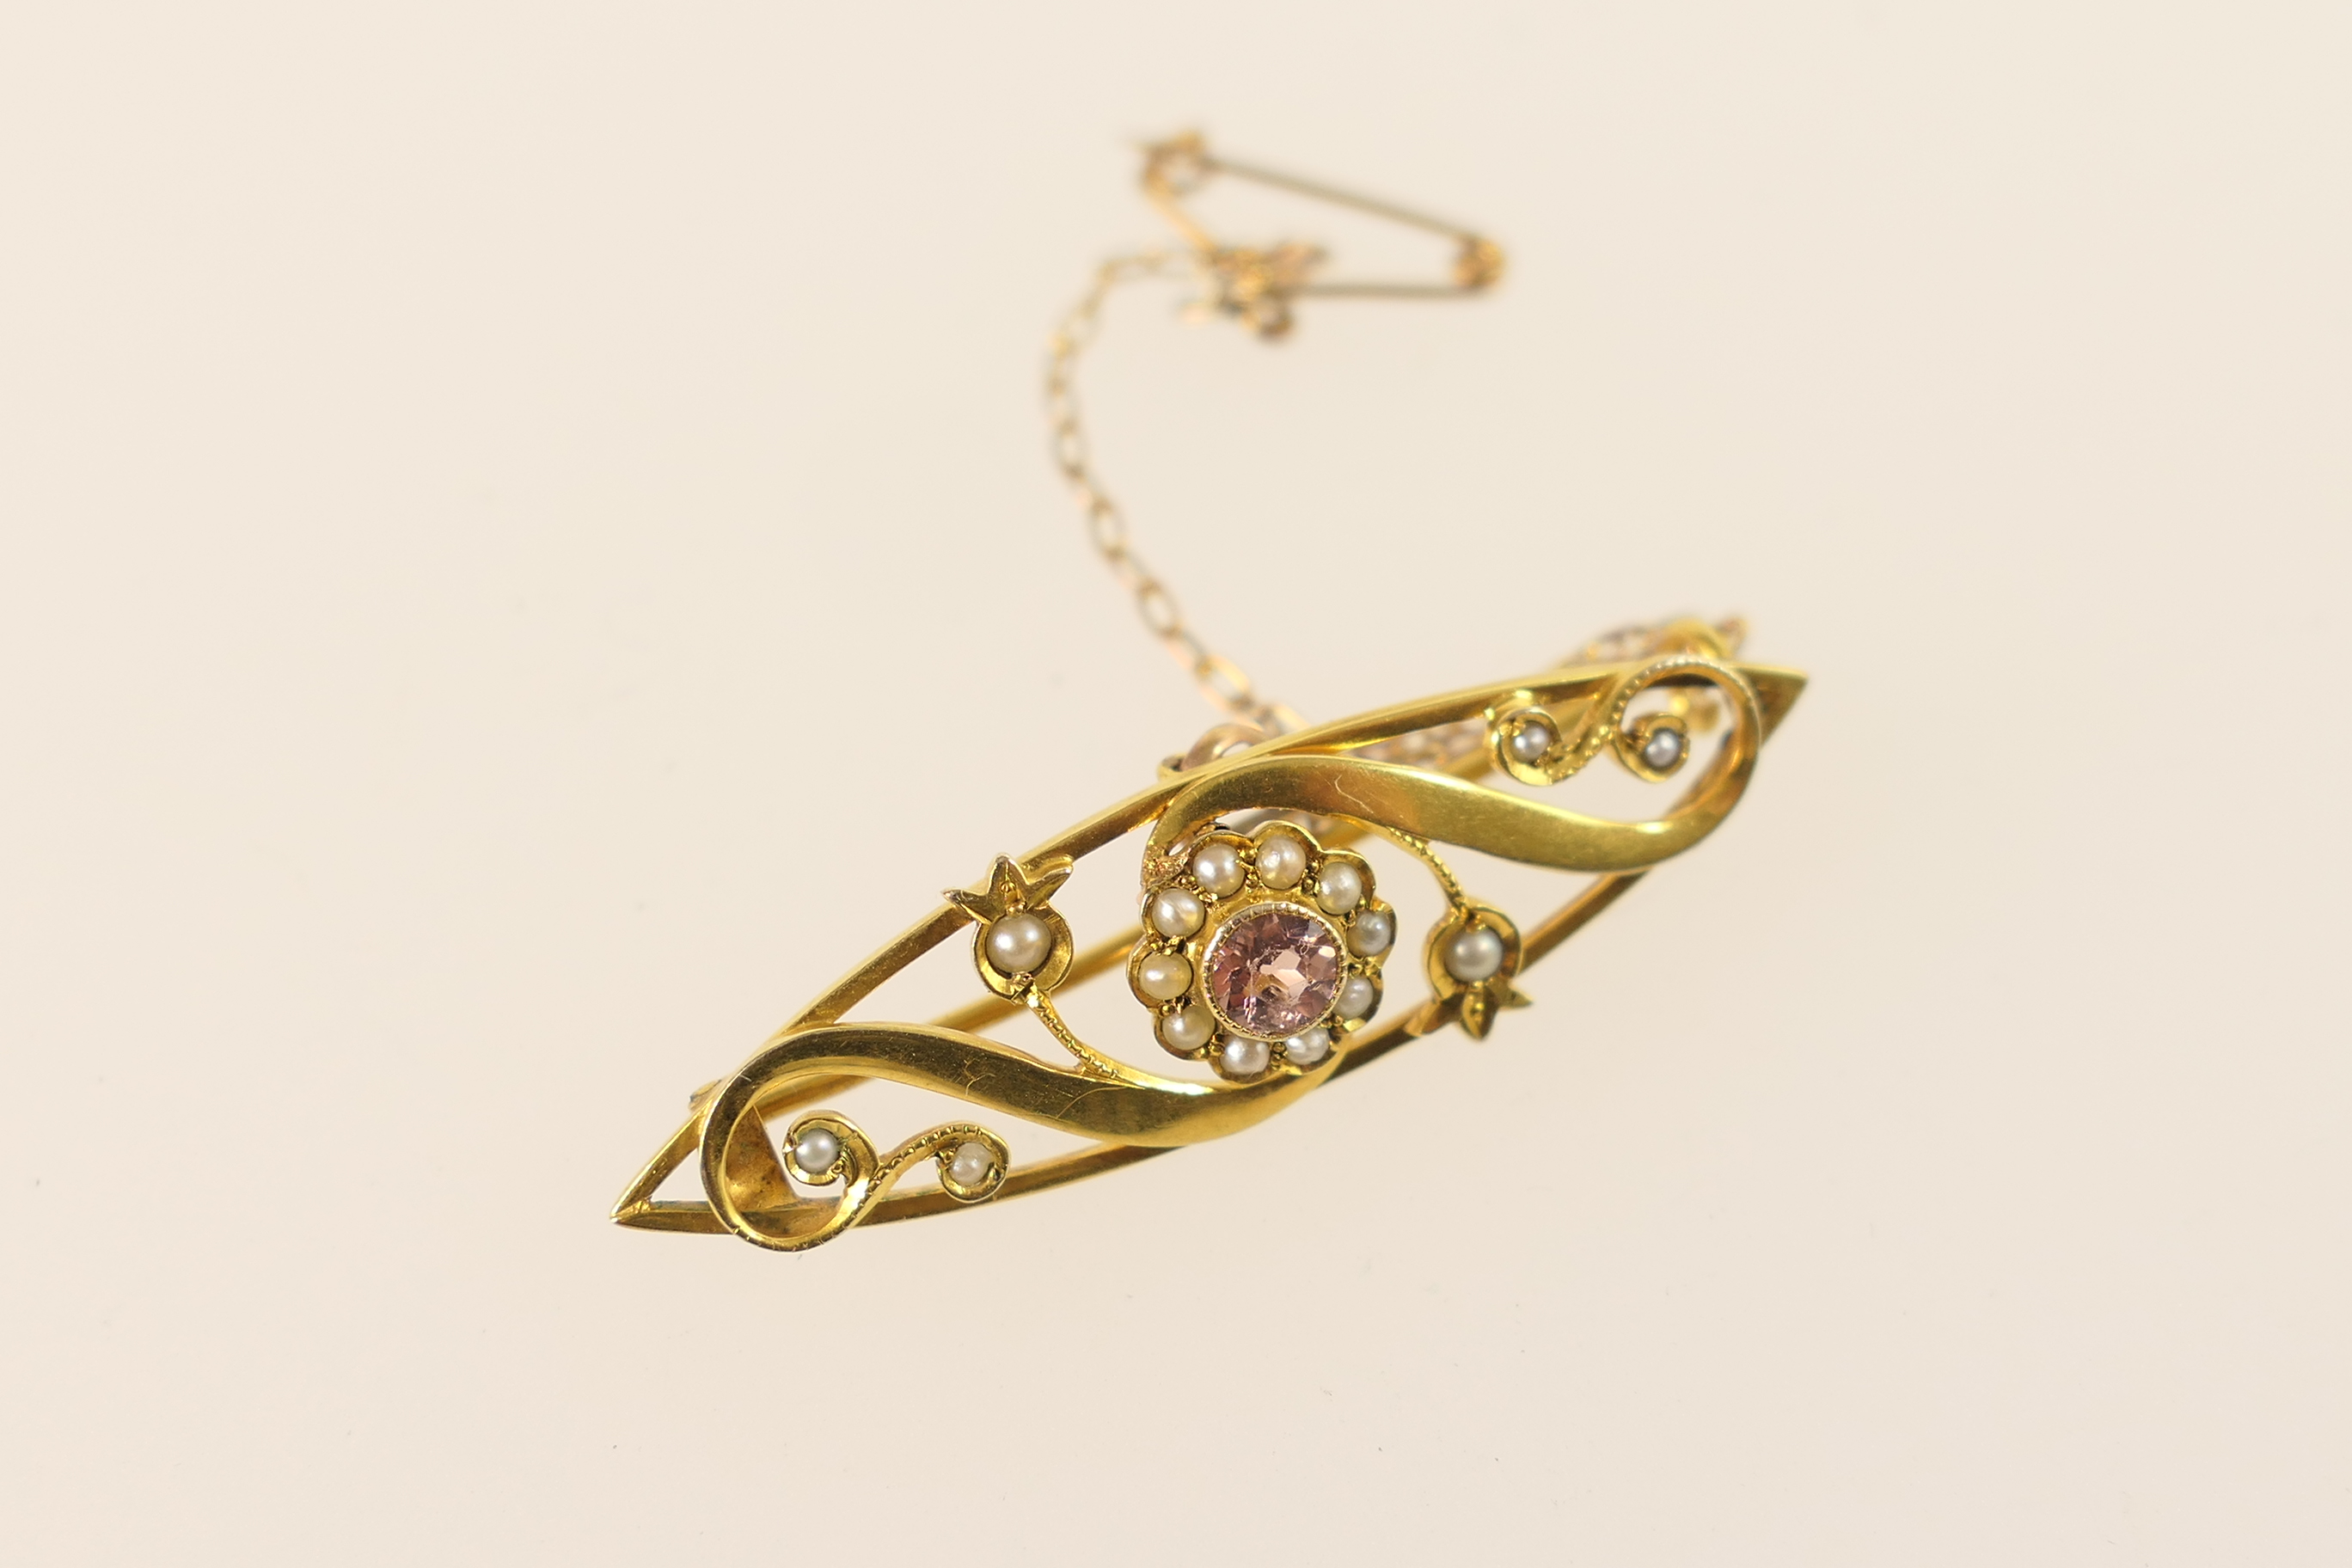 Edwardian 9ct gold bar brooch, the navette open scroll form centred with a pink tourmaline